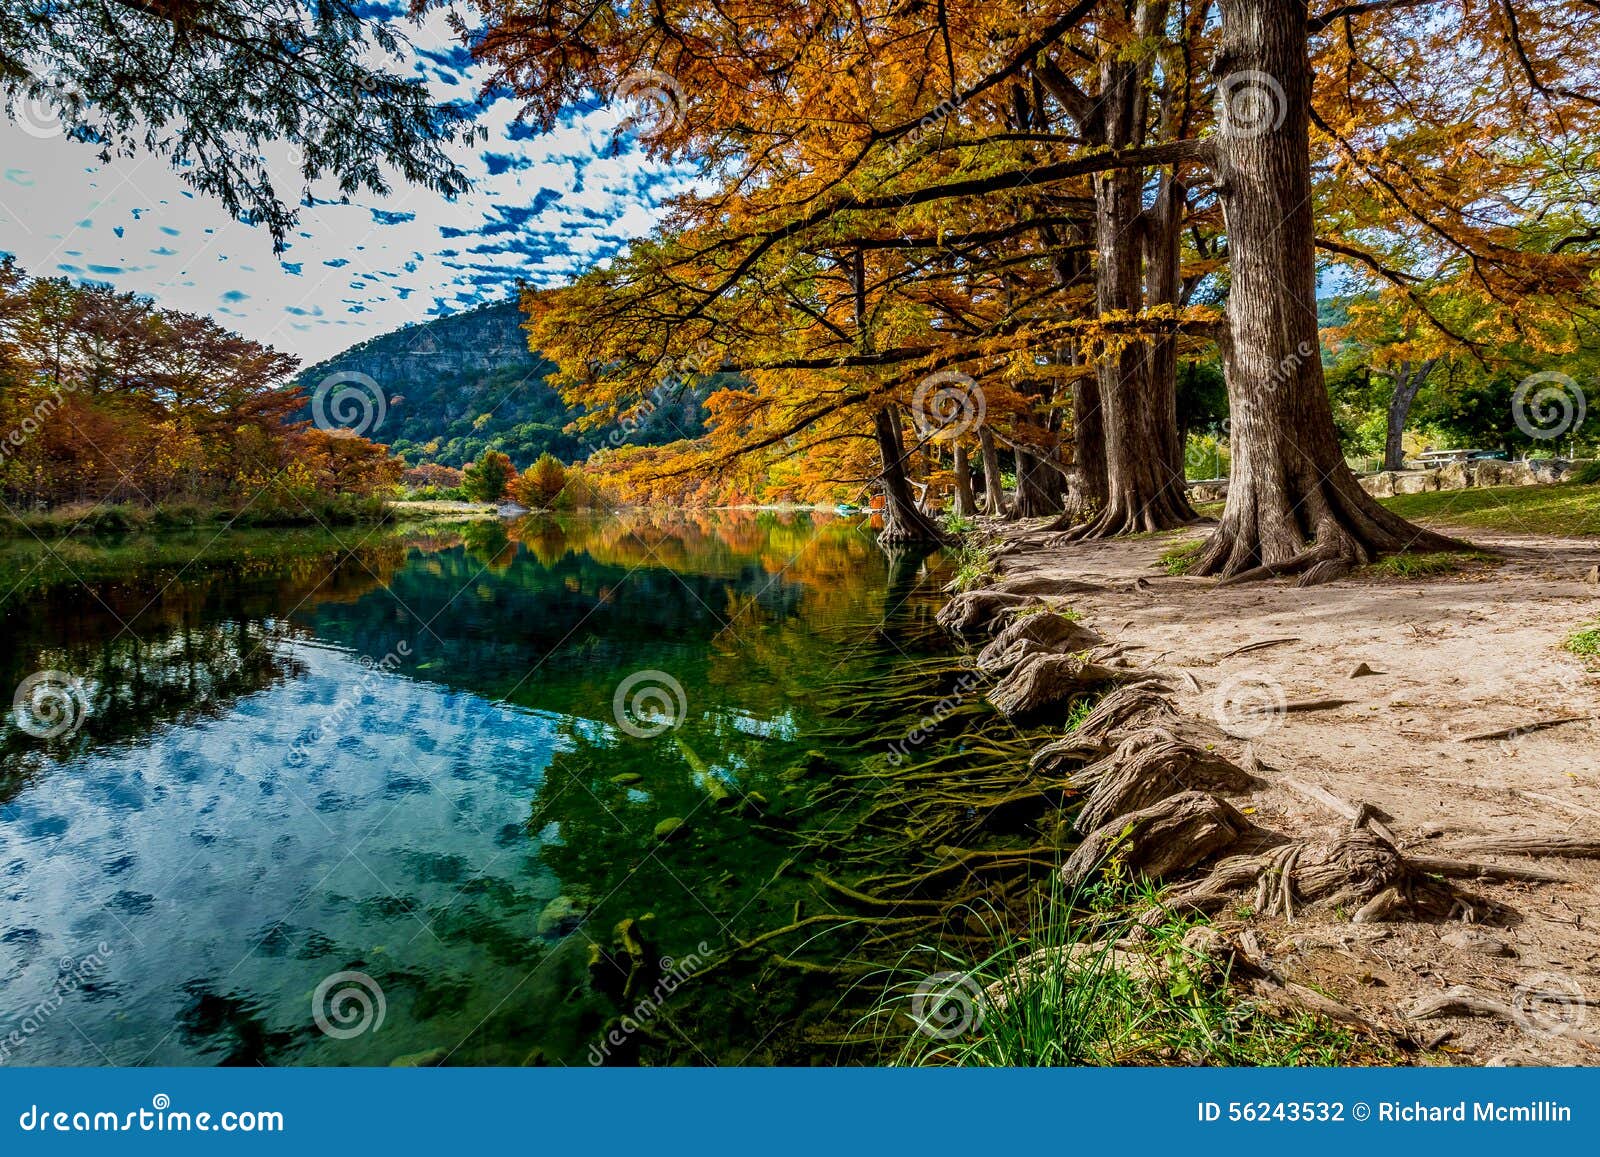 trees with fall foliage lining the frio river at garner state park